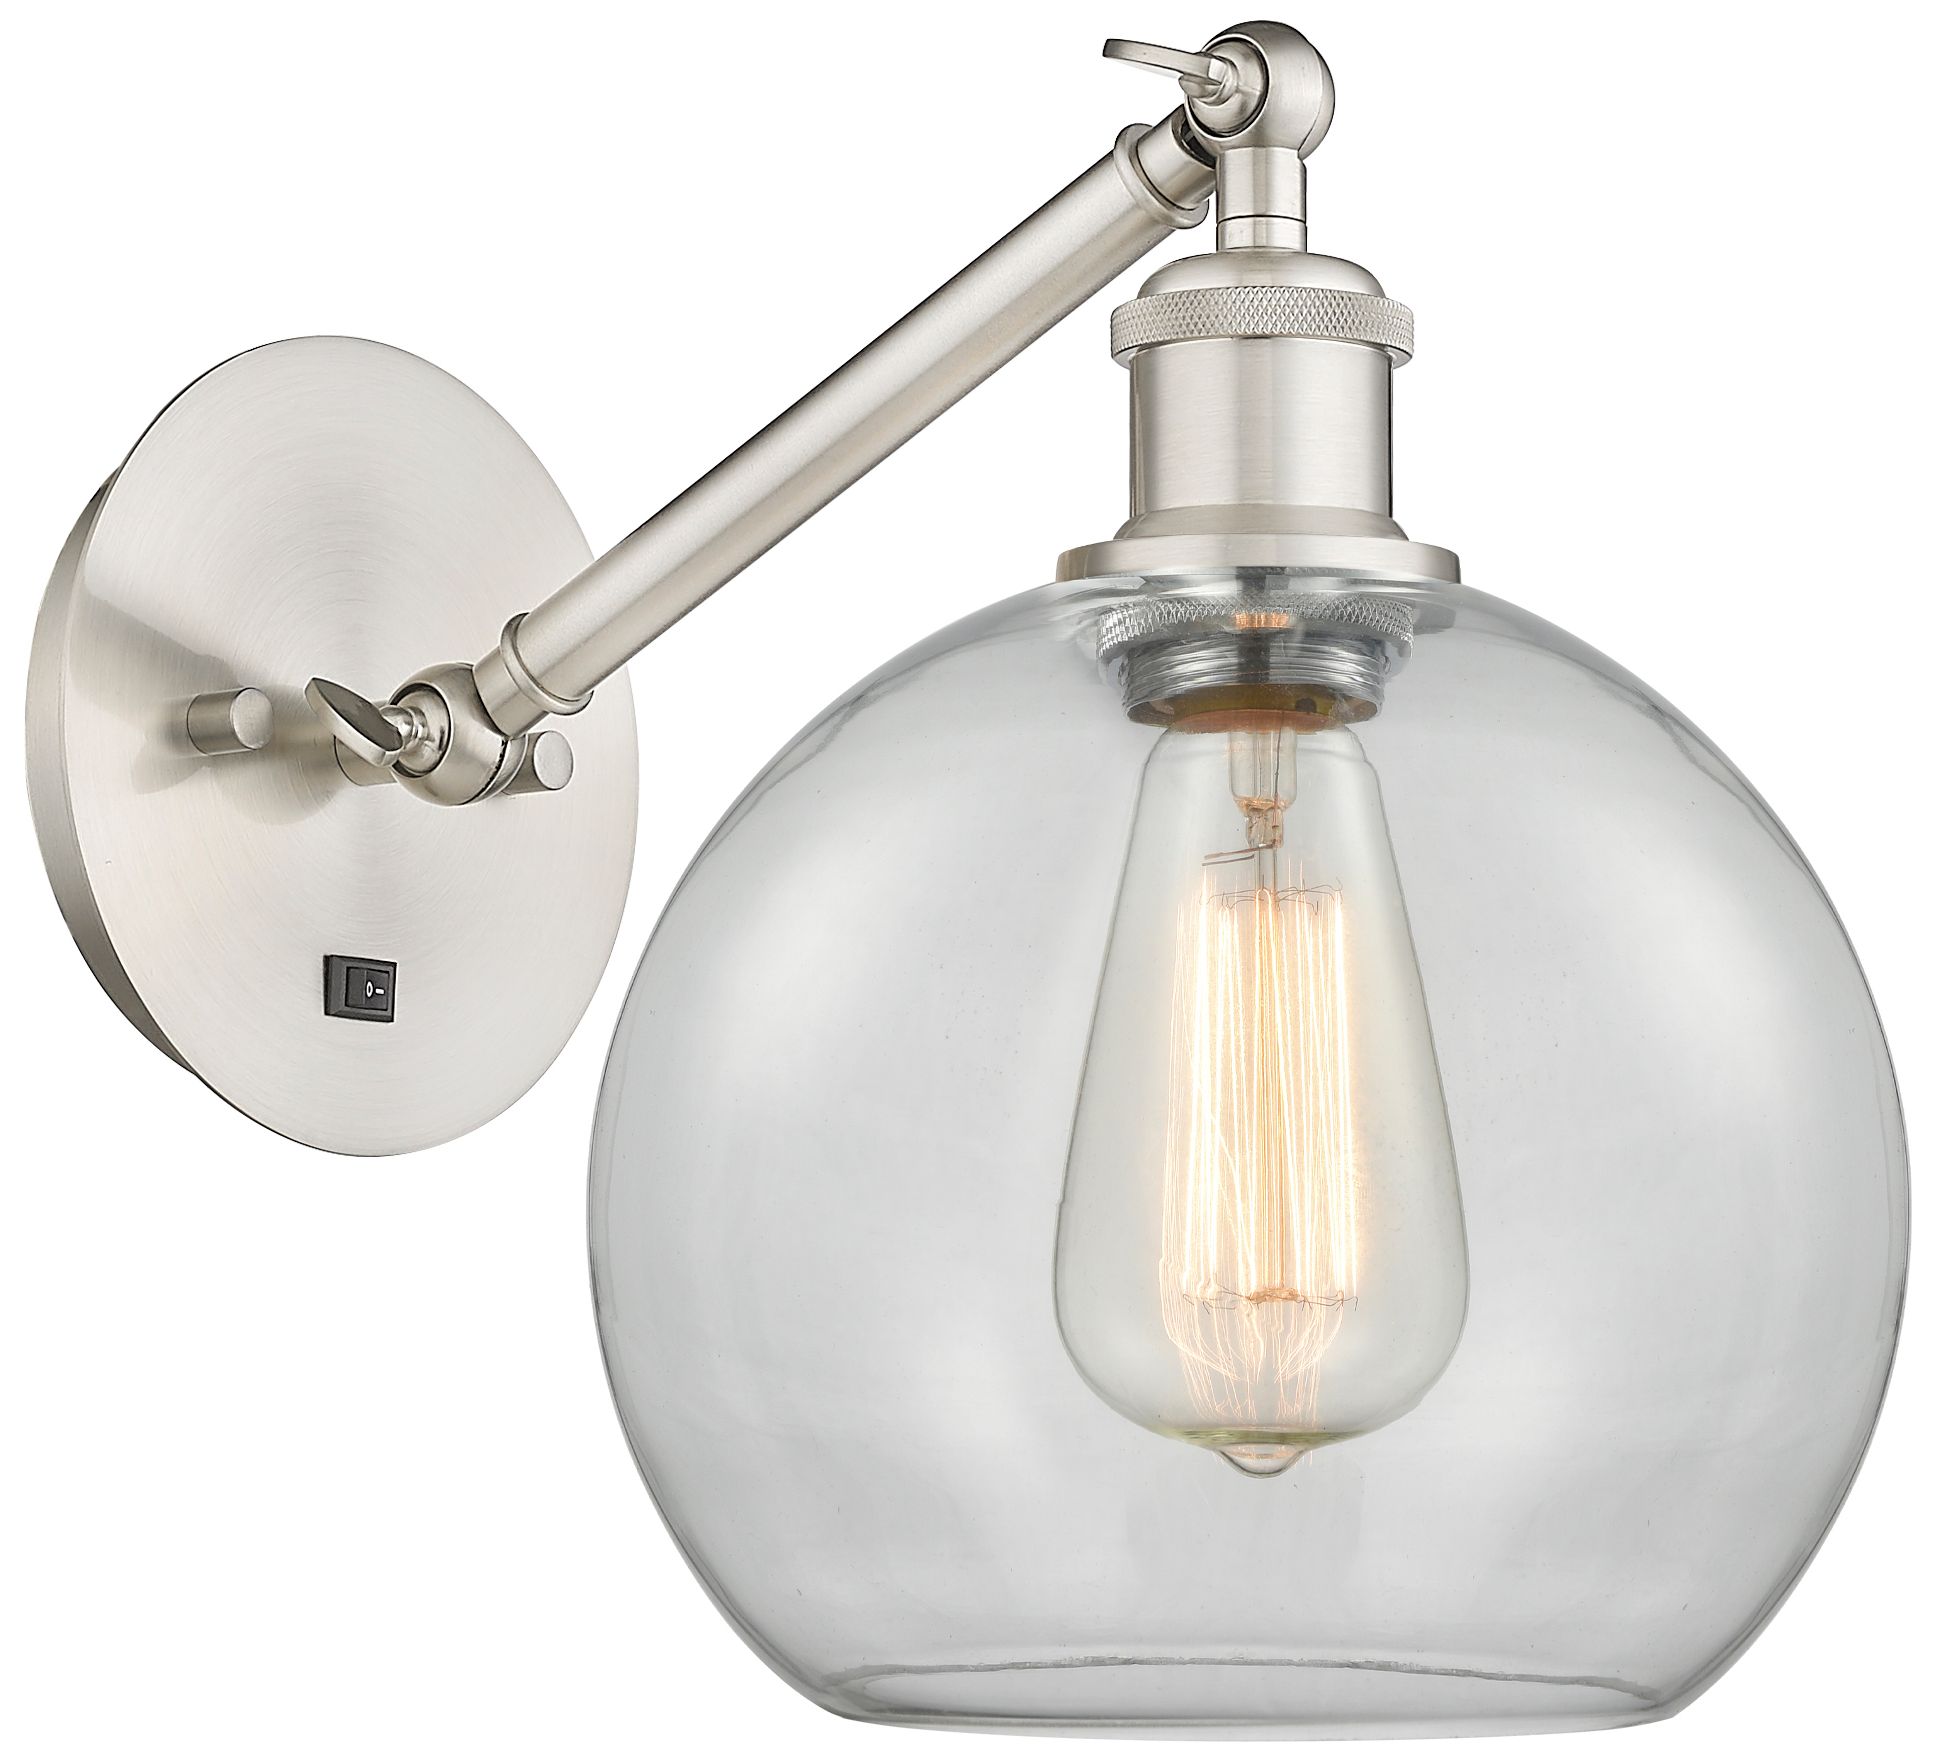 Ballston Athens 8" Incandescent Sconce - Nickel Finish - Clear Shade